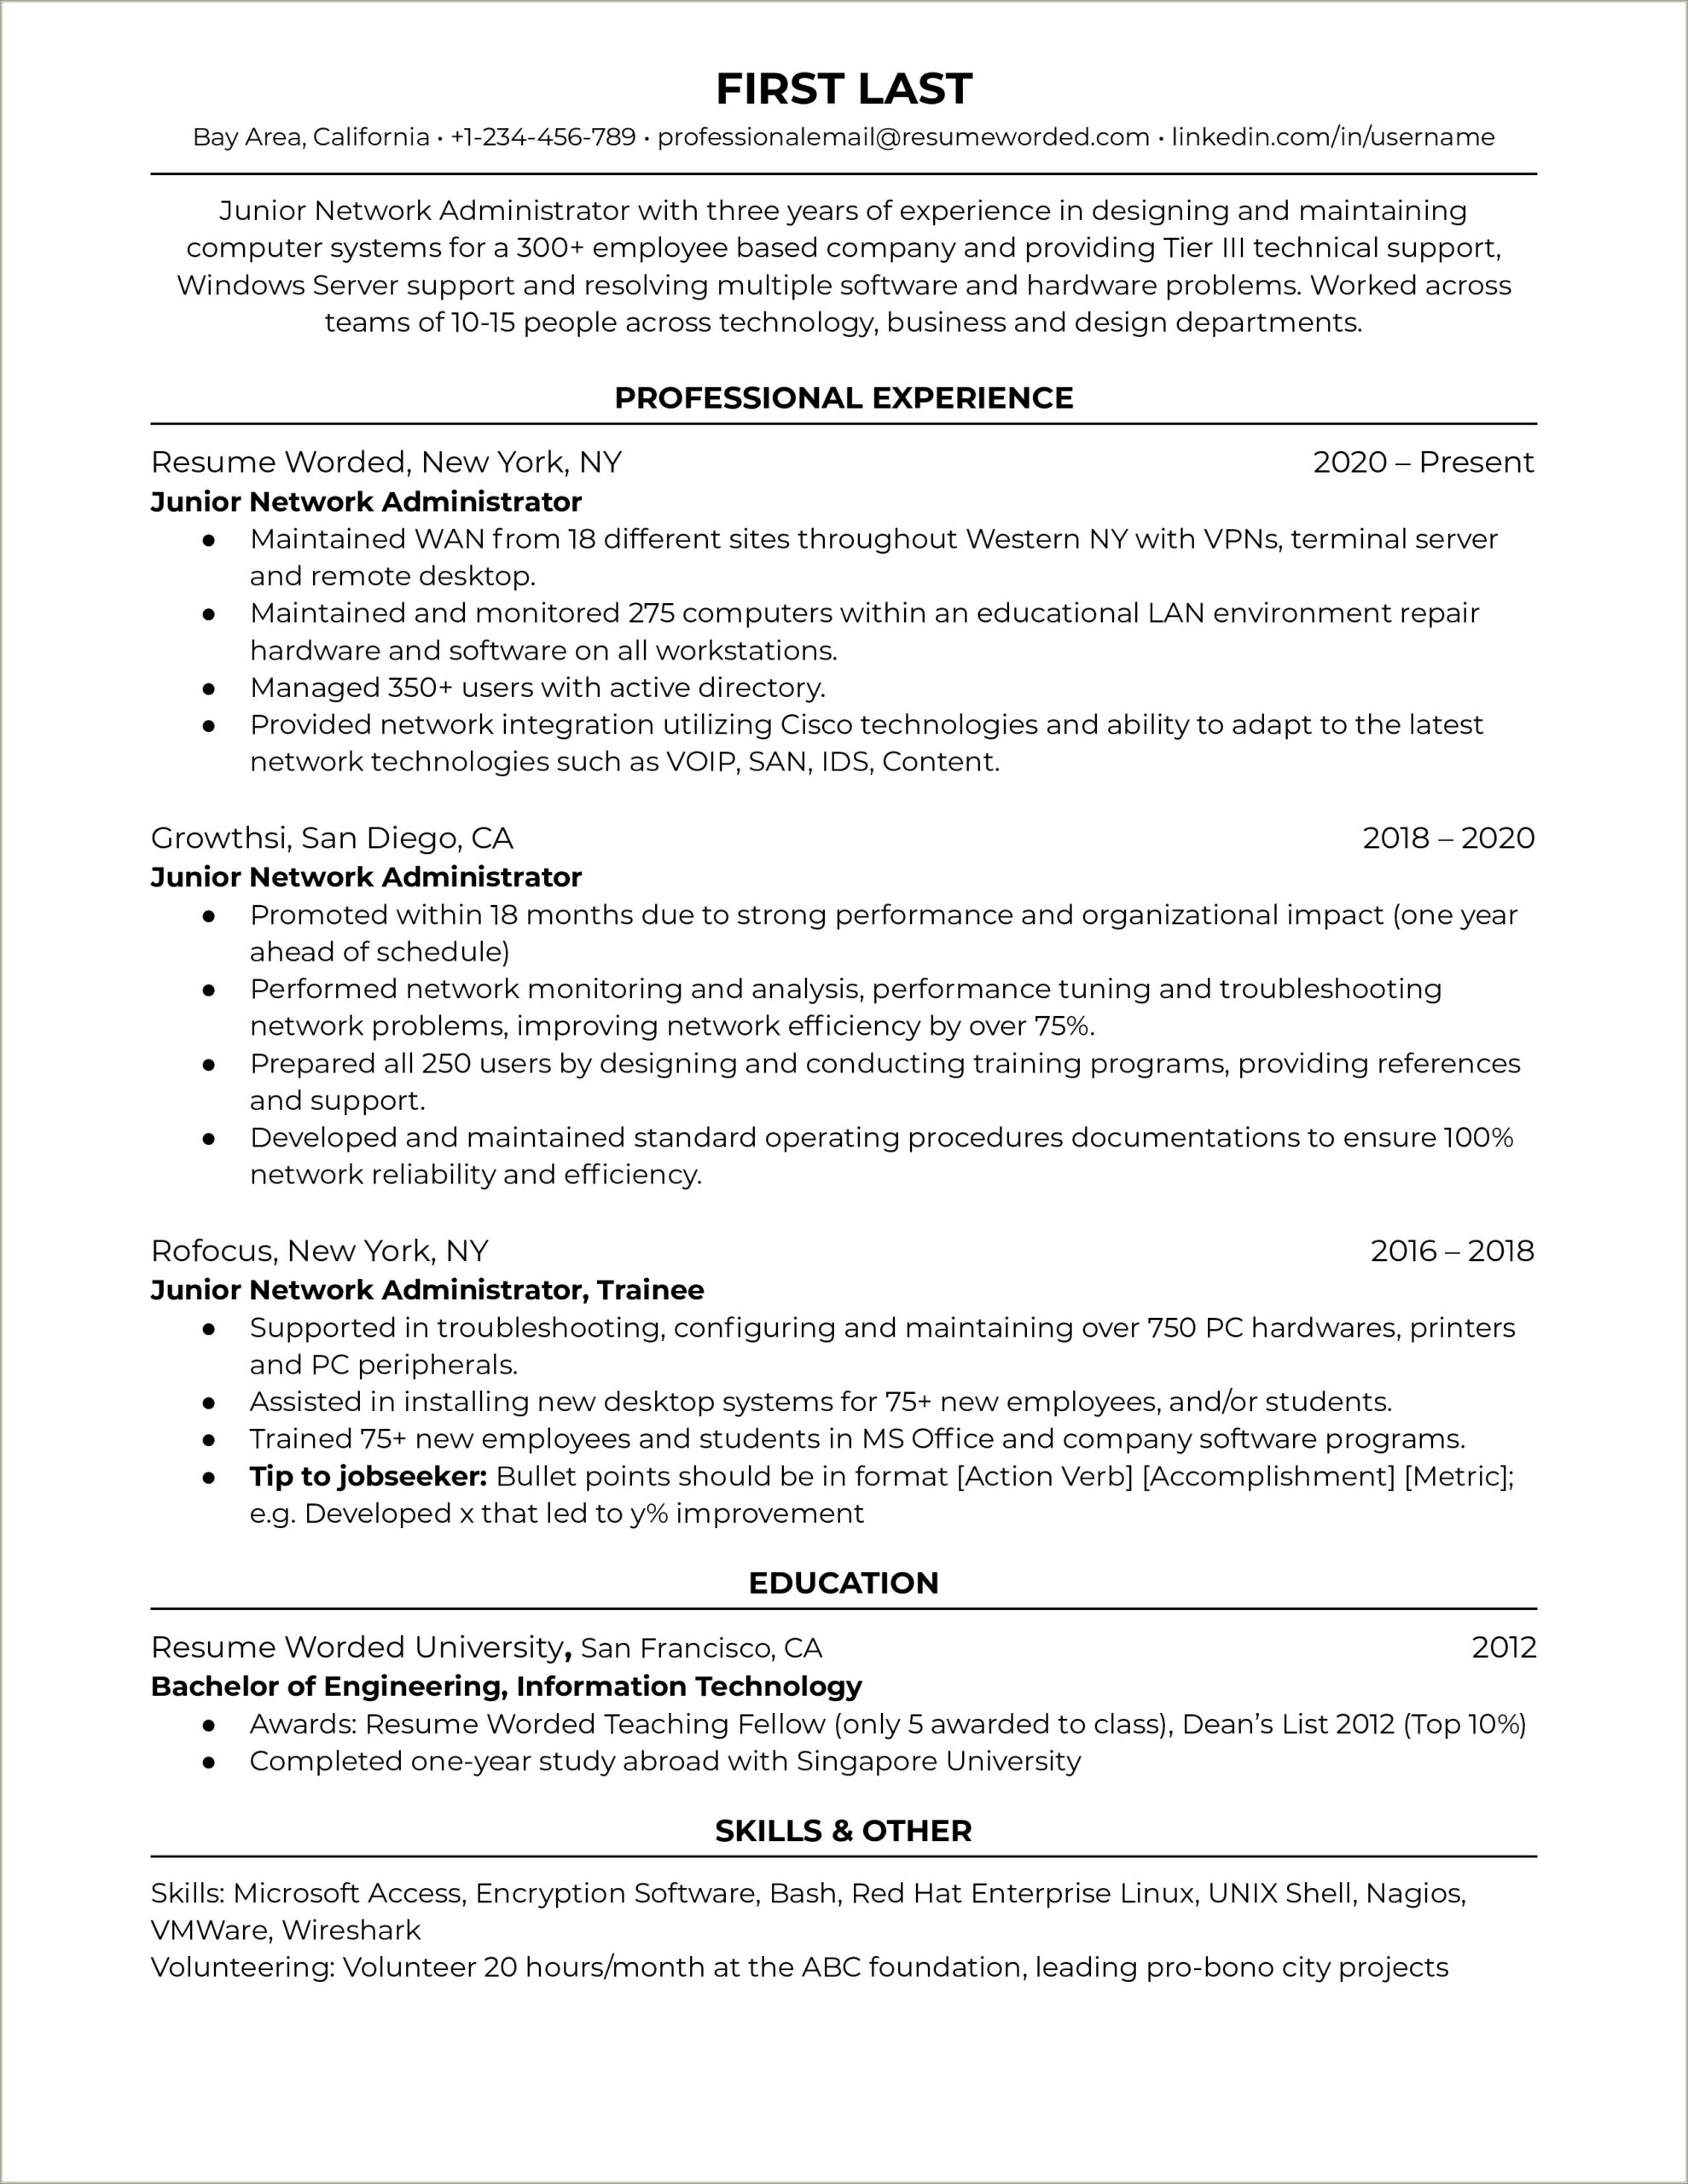 Linux Administrator Resume 10 Year Experience